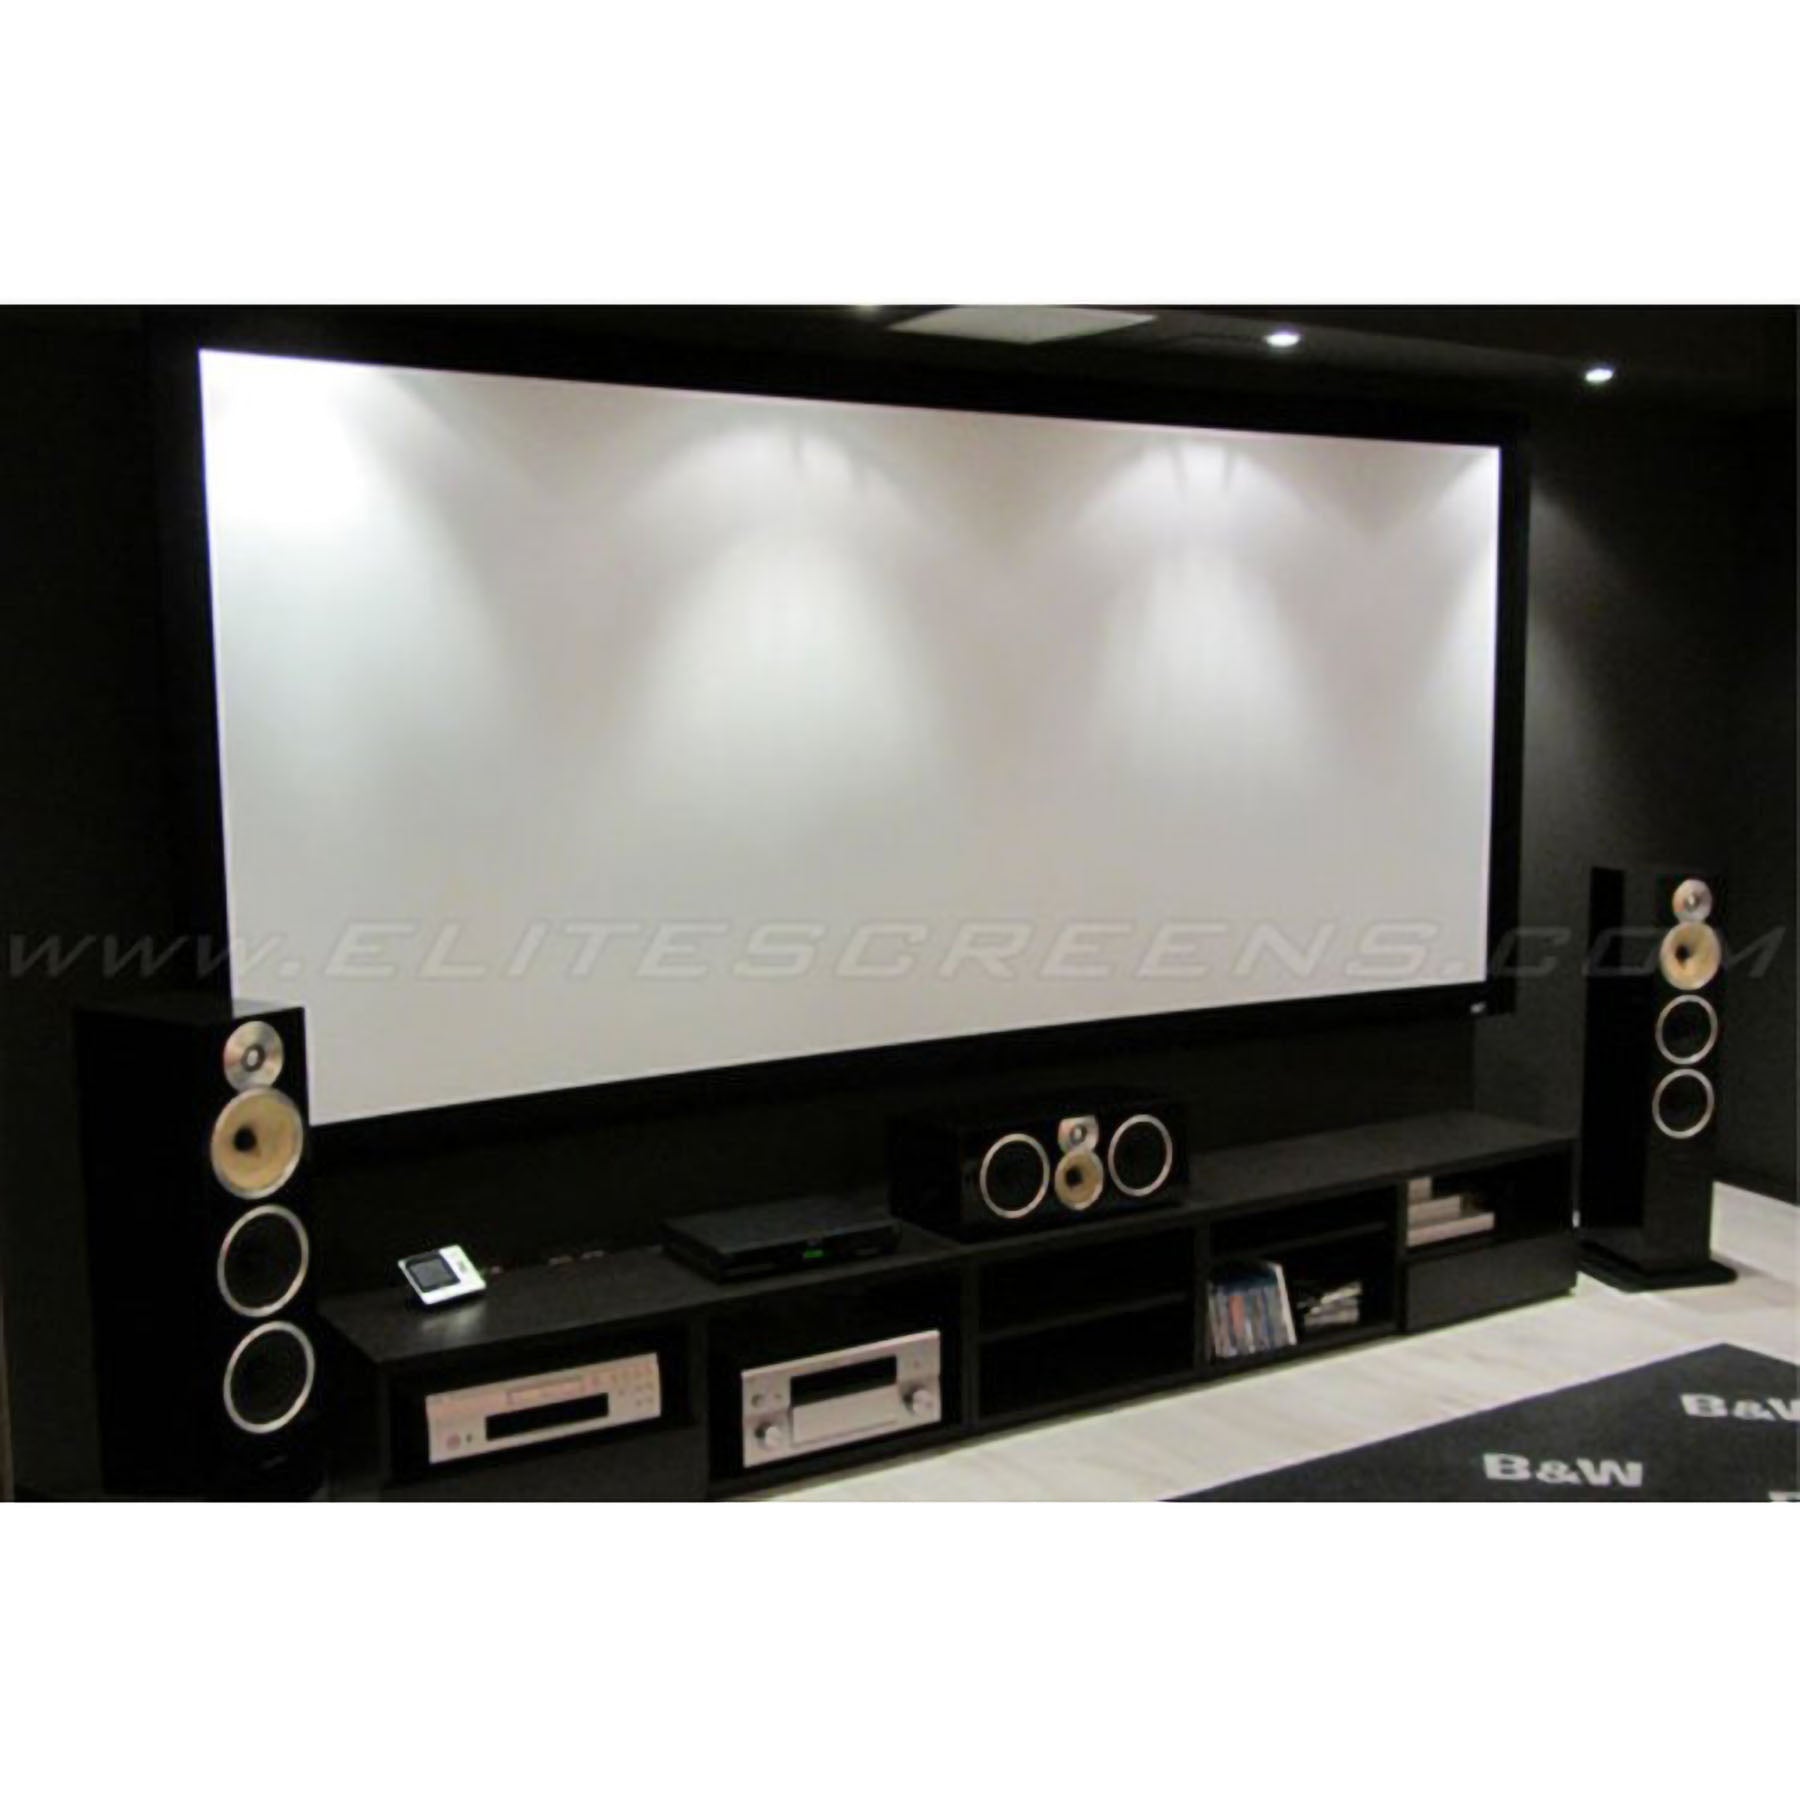 Elite Screens Curve135H-A4K 135" Lunette Acoustic 4K 16:9 Curved Fixed Frame Screen